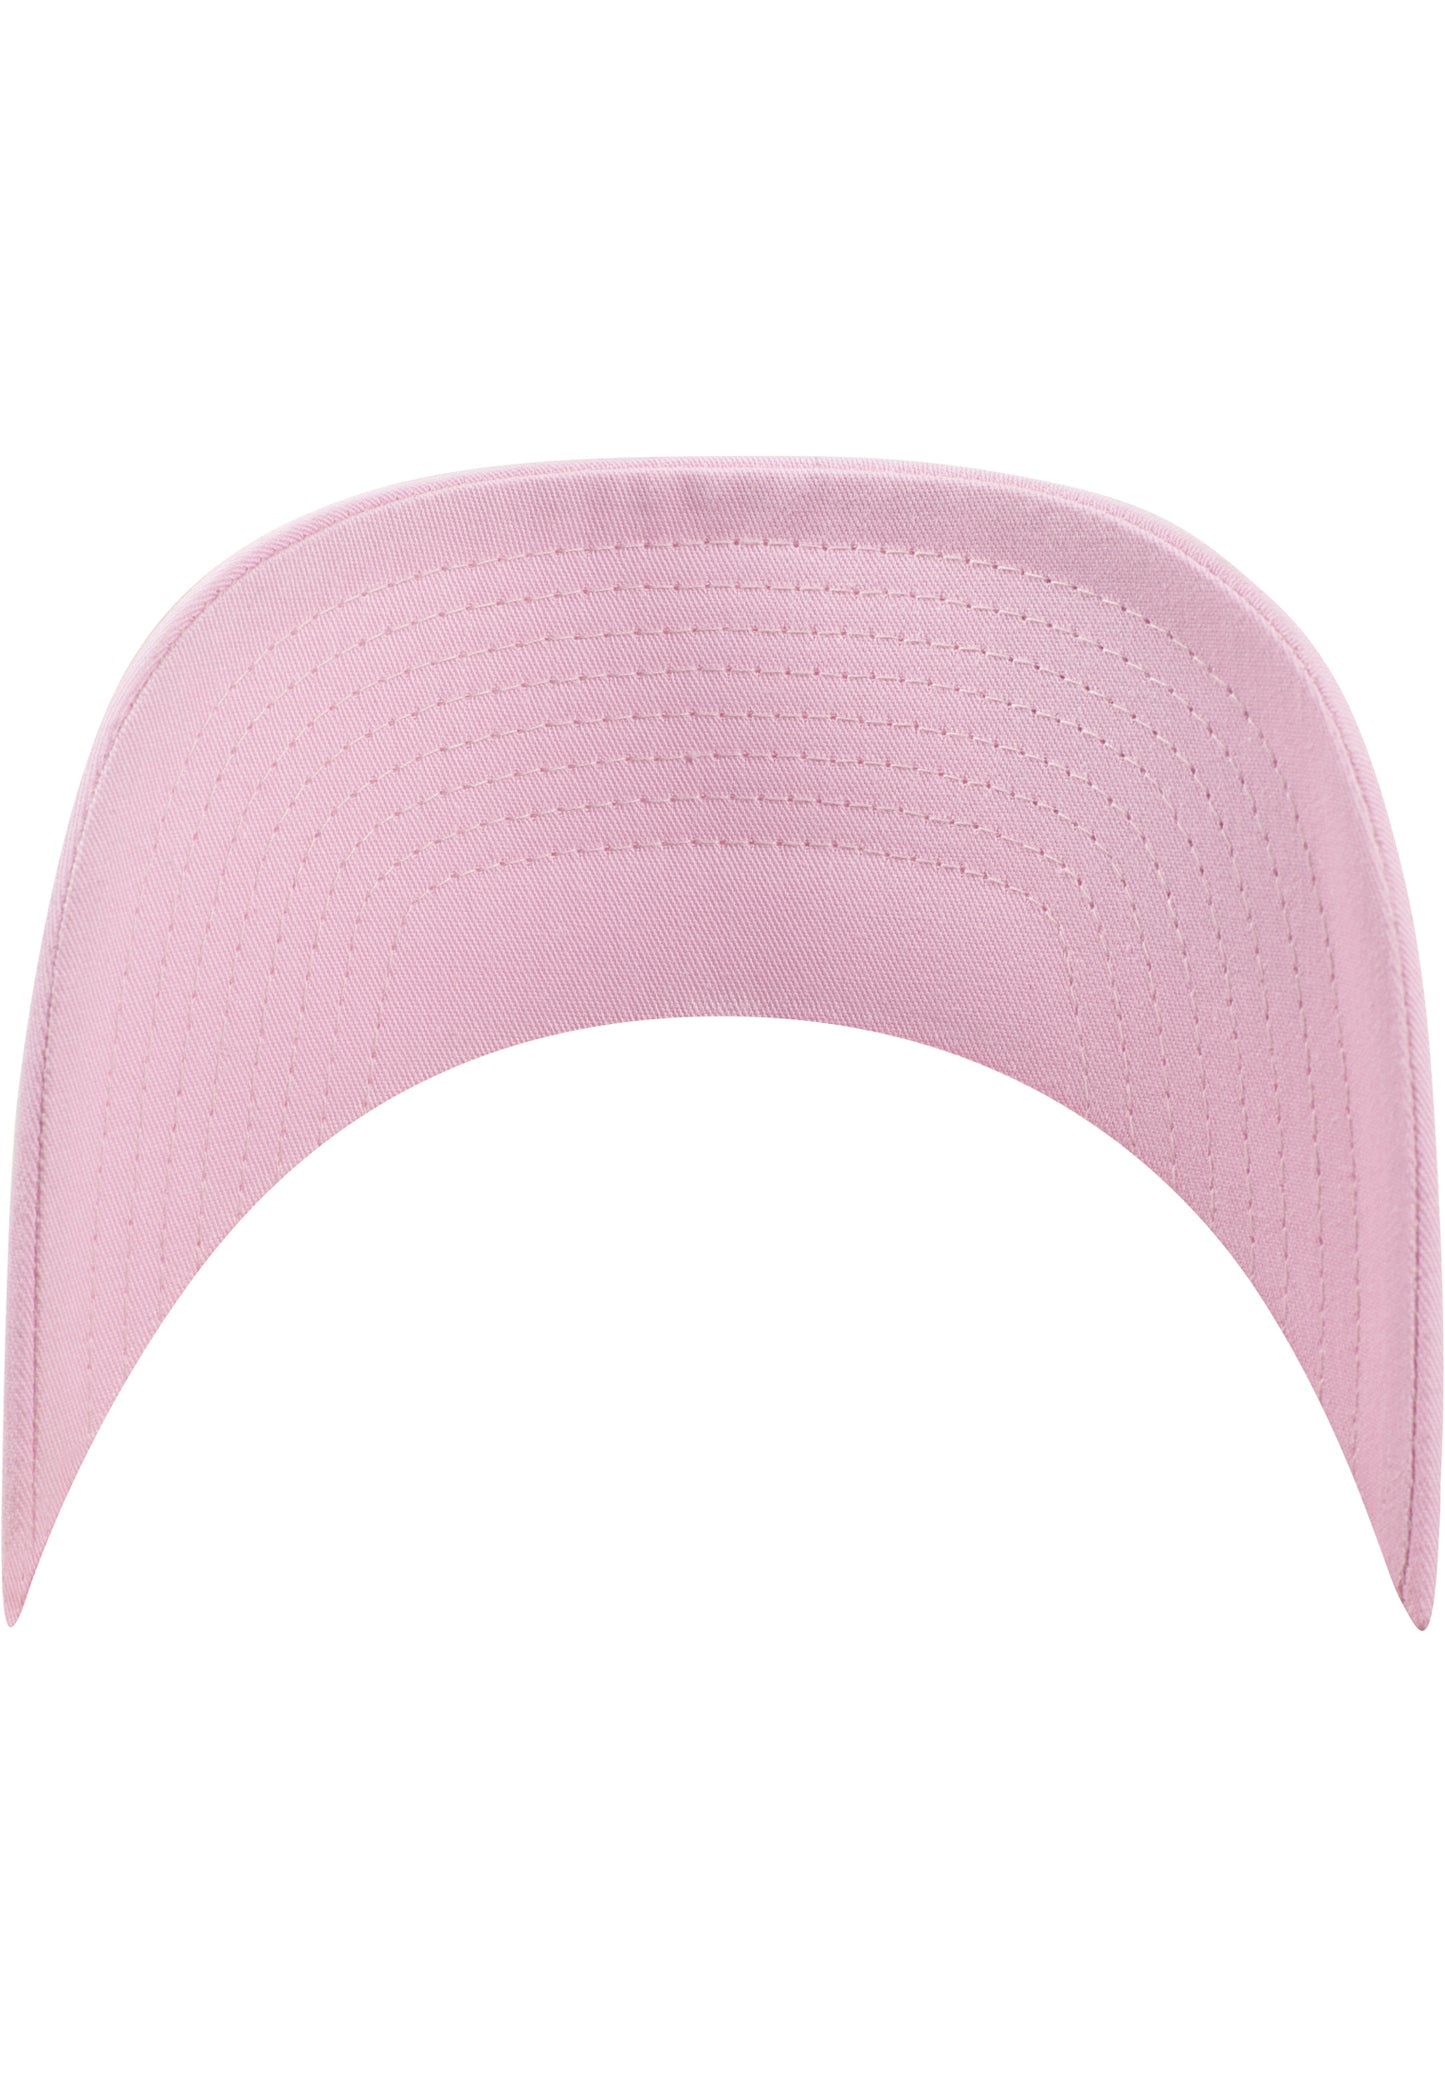 Curved Classic Snapback - Pink - Headz Up 